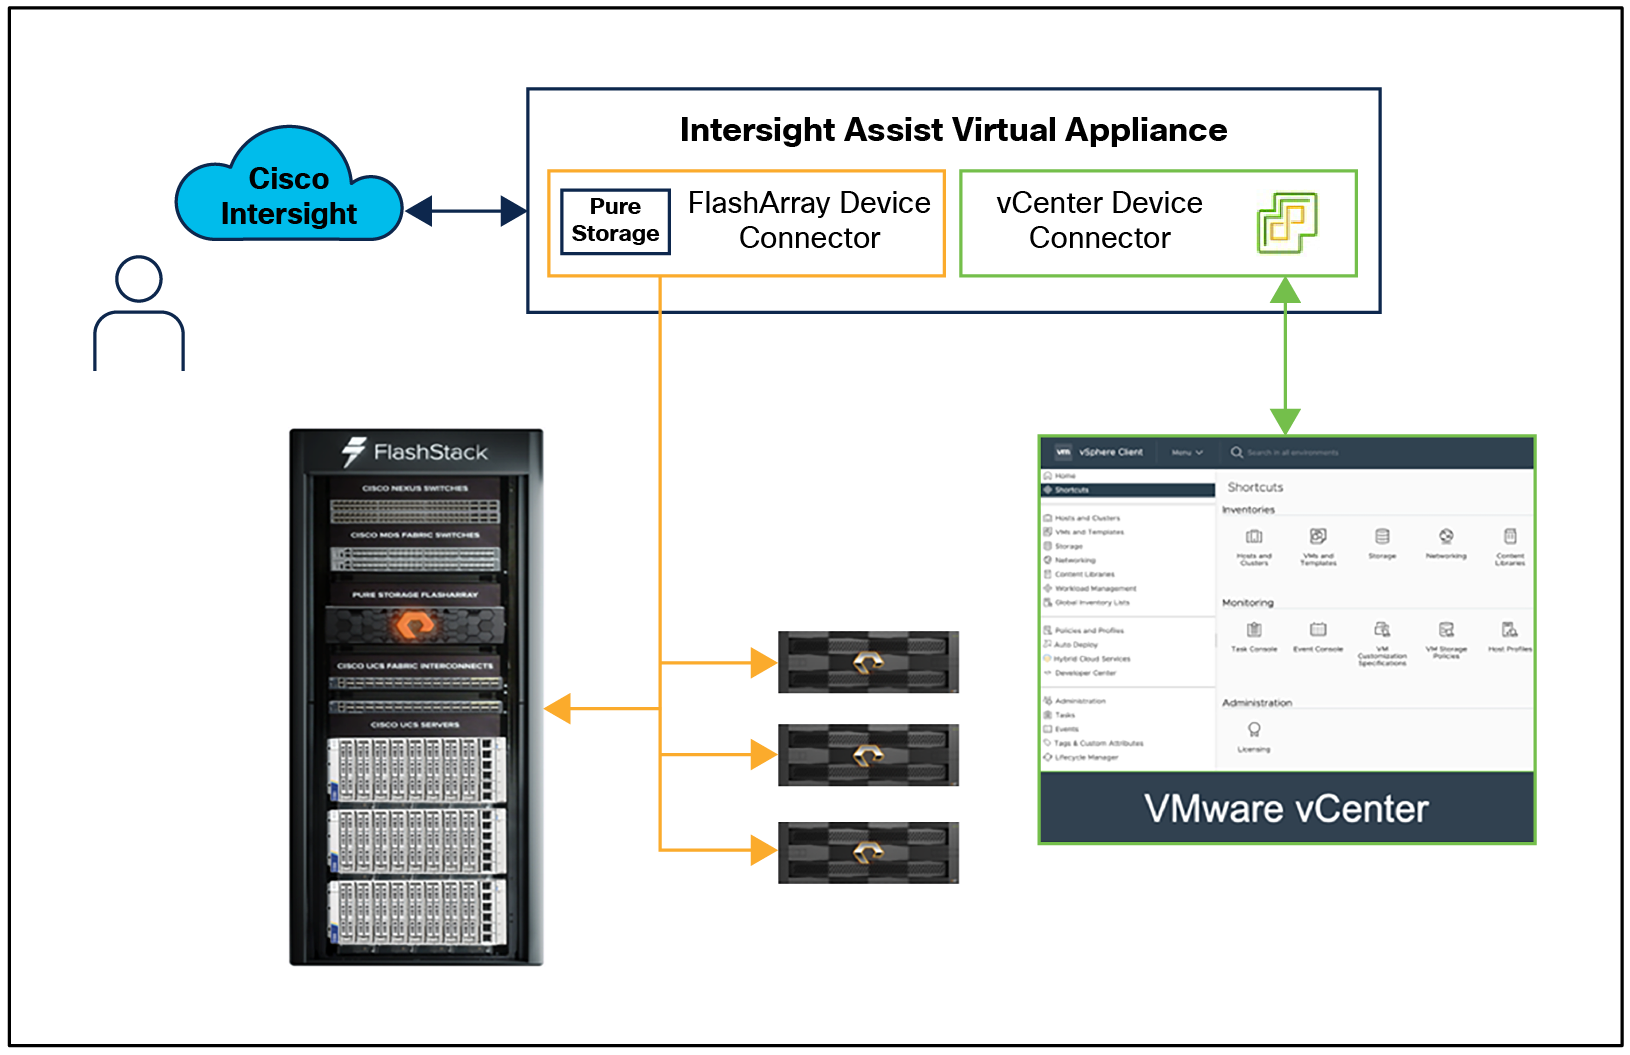 Cisco Intersight and vCenter and Pure Storage integration